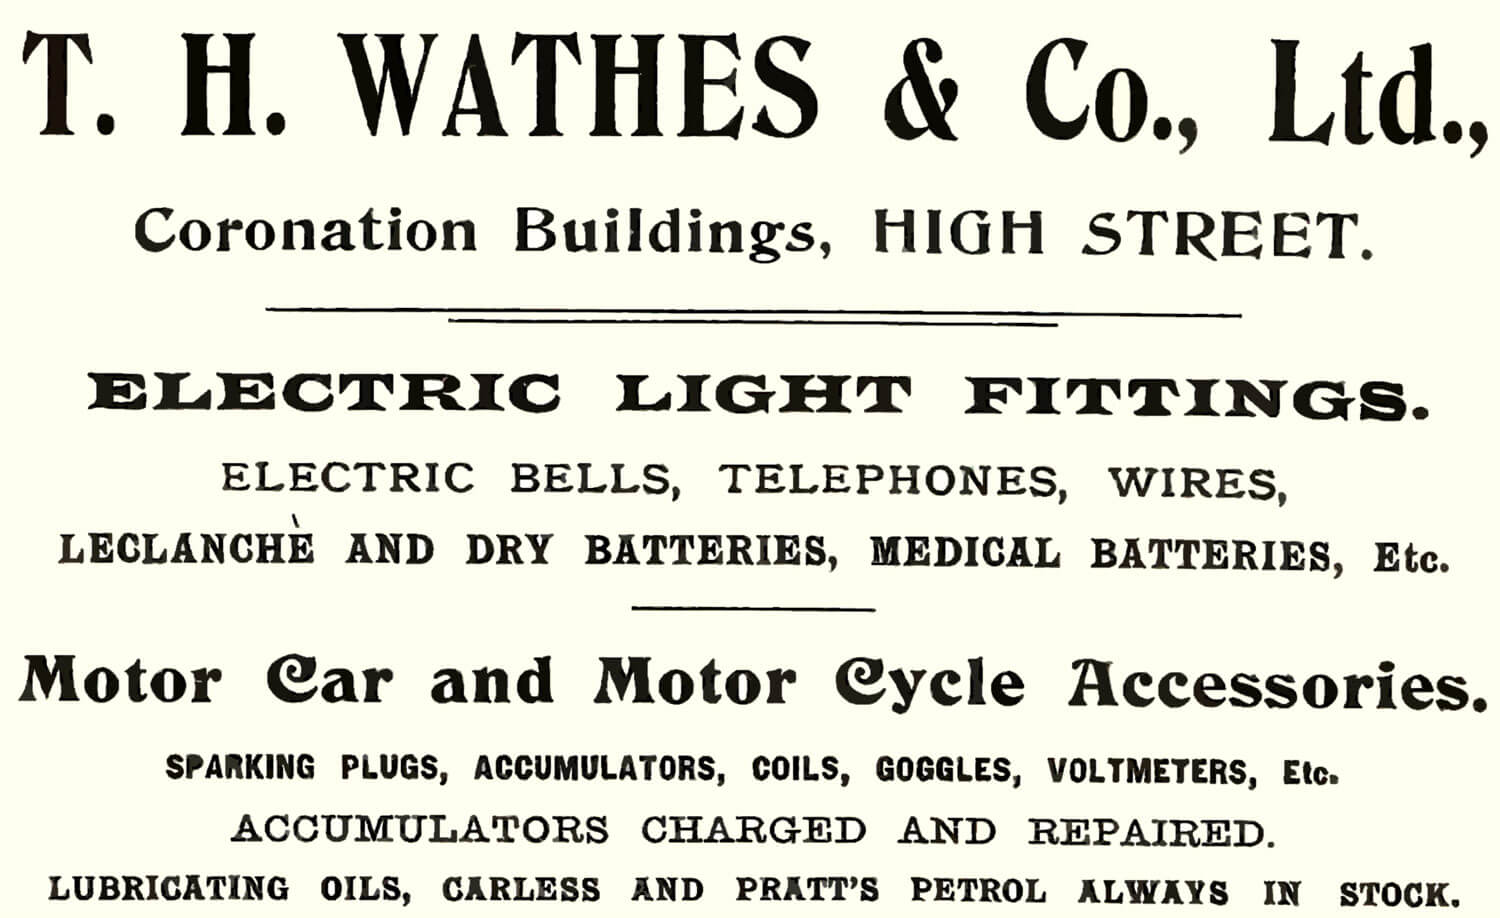 Advert for T.H. Wathes & Co. Ltd. Who were based in the Coronation Buildings -